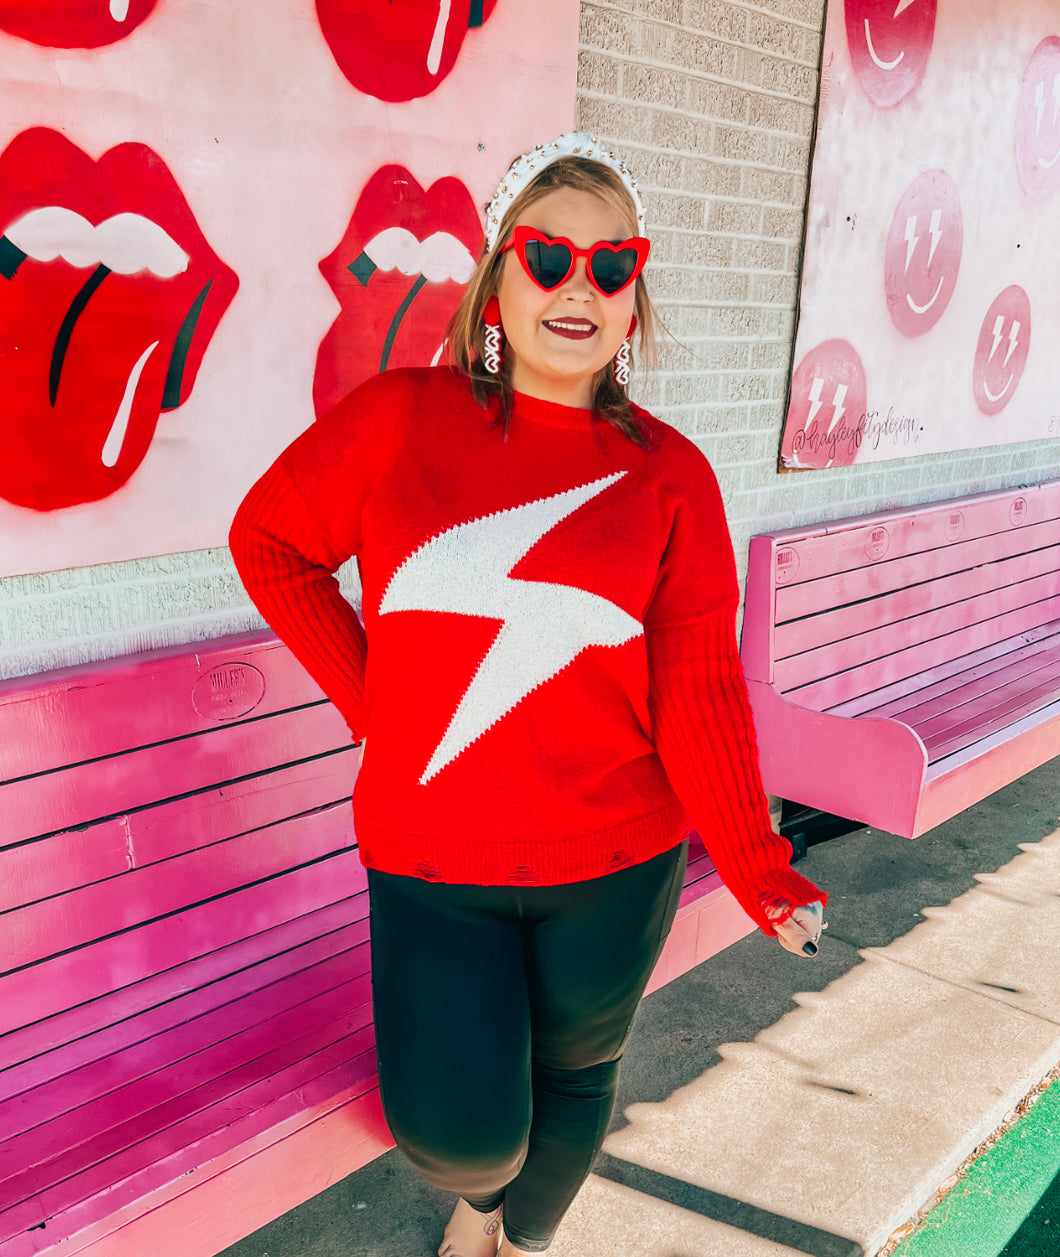 Red lightning bolt distressed sweater